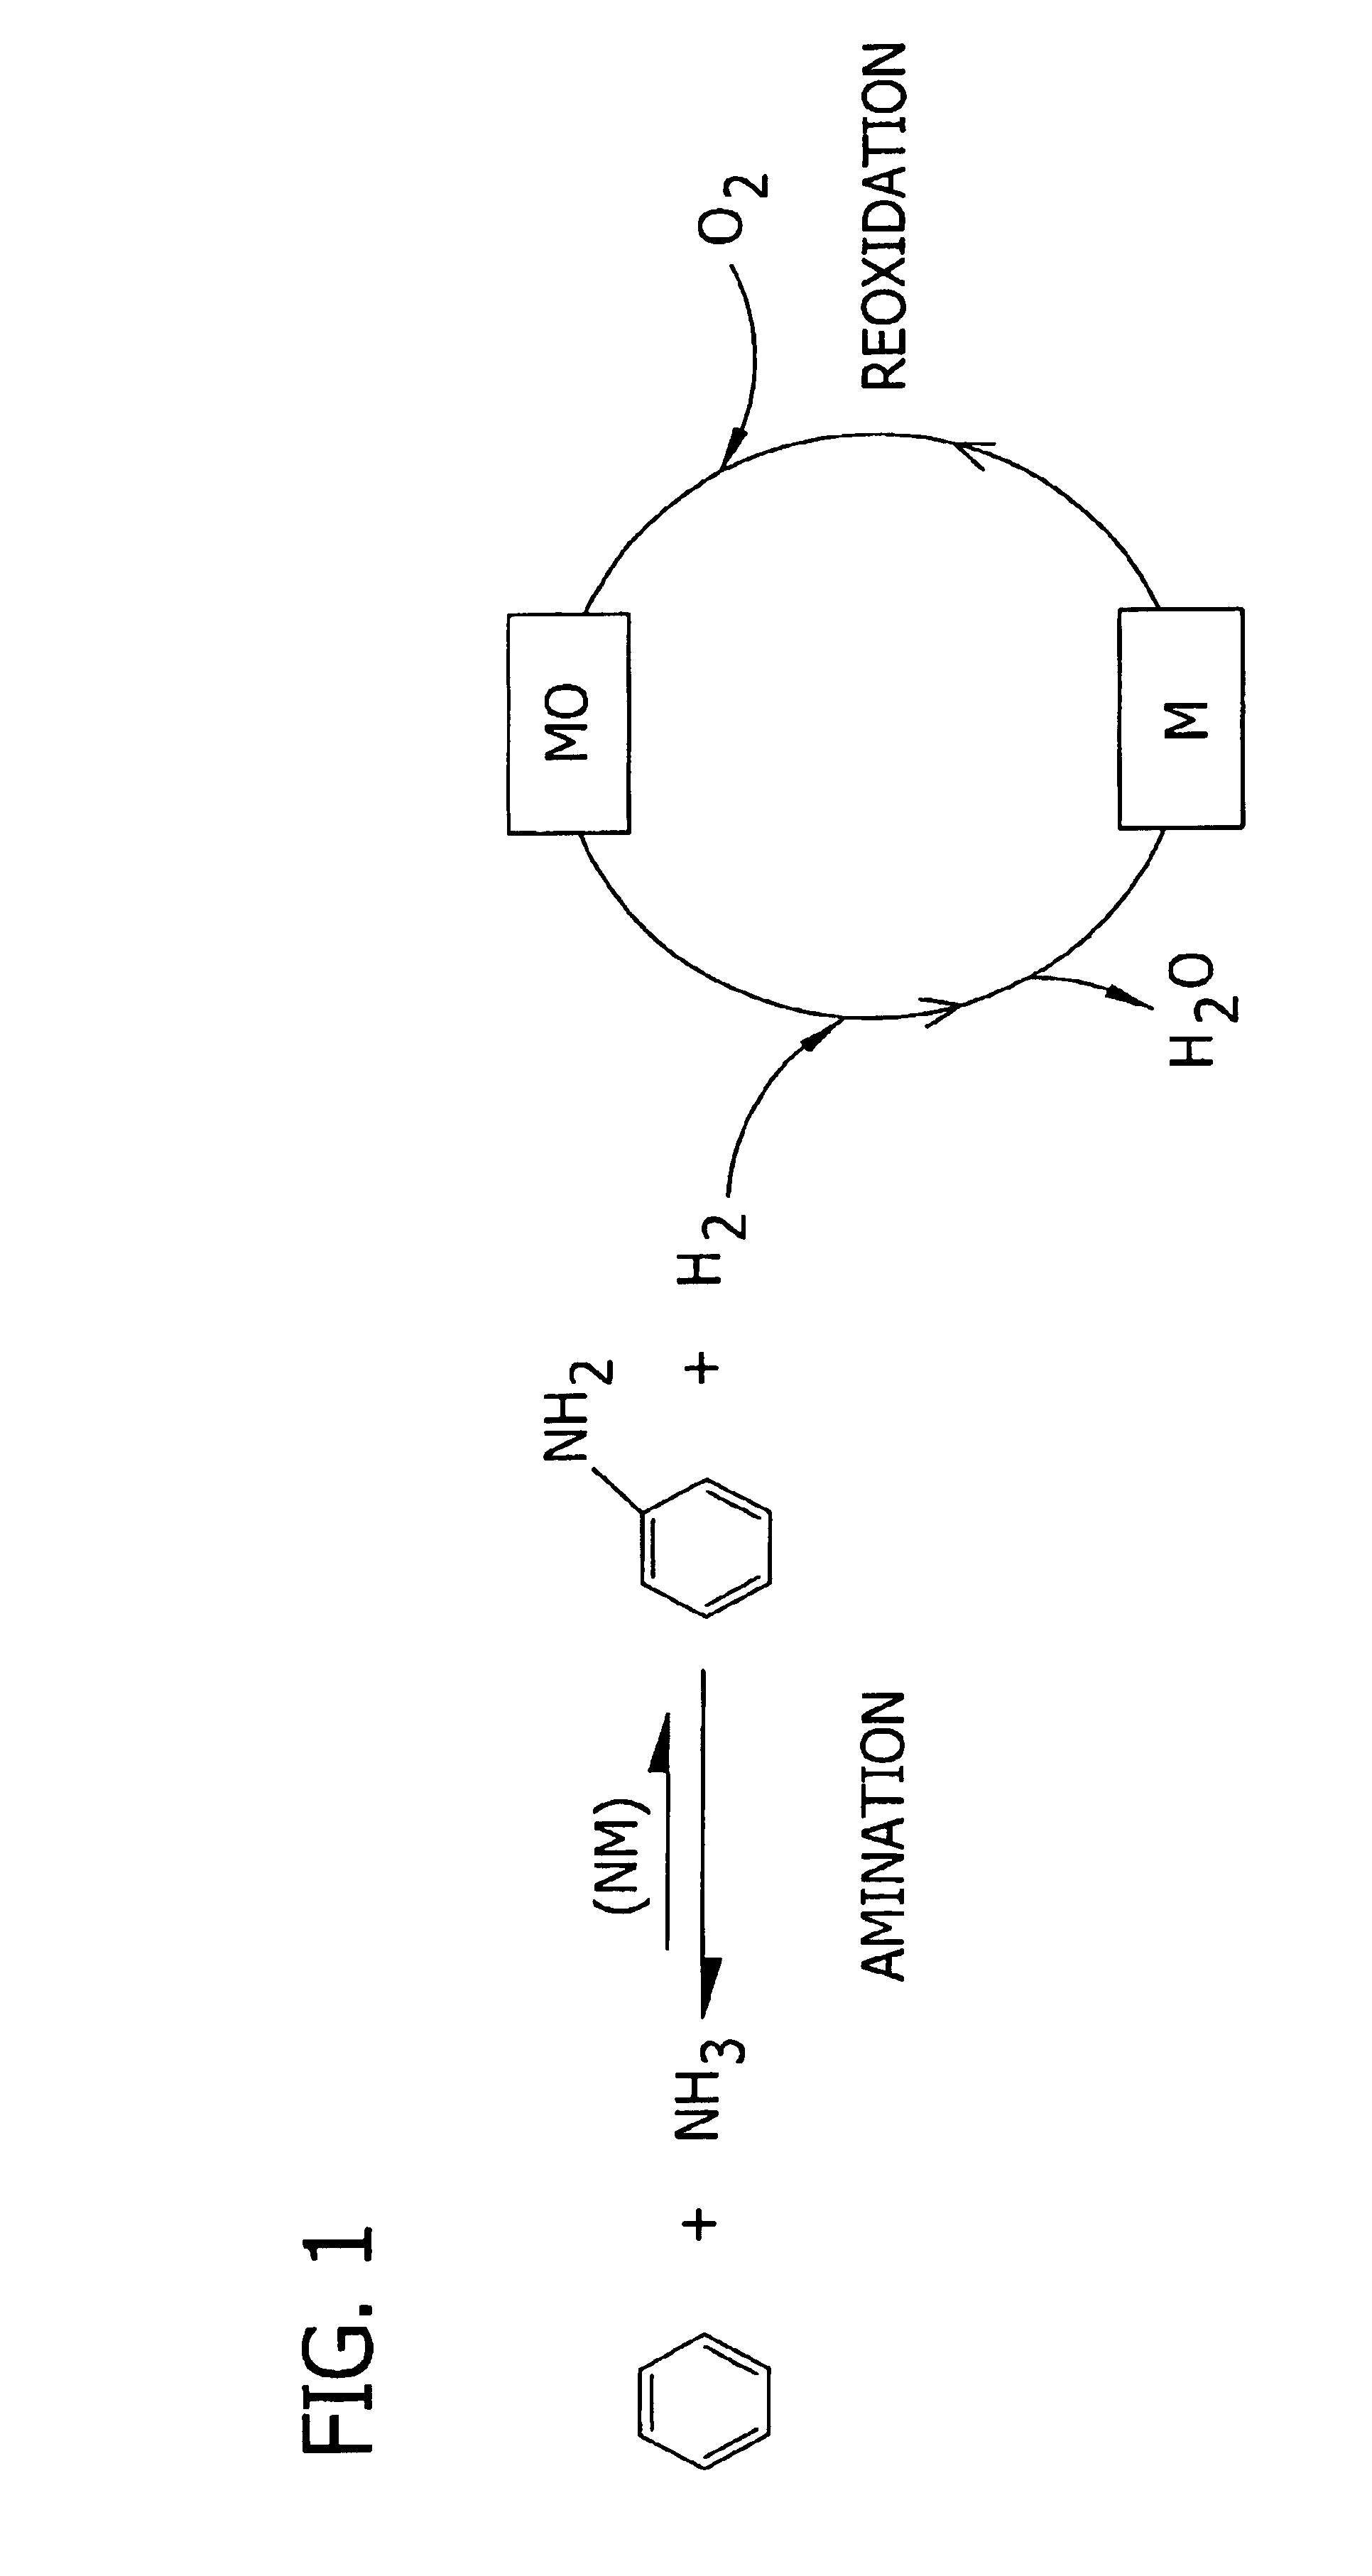 Amination of aromatic hydrocarbons and heterocyclic analogs thereof